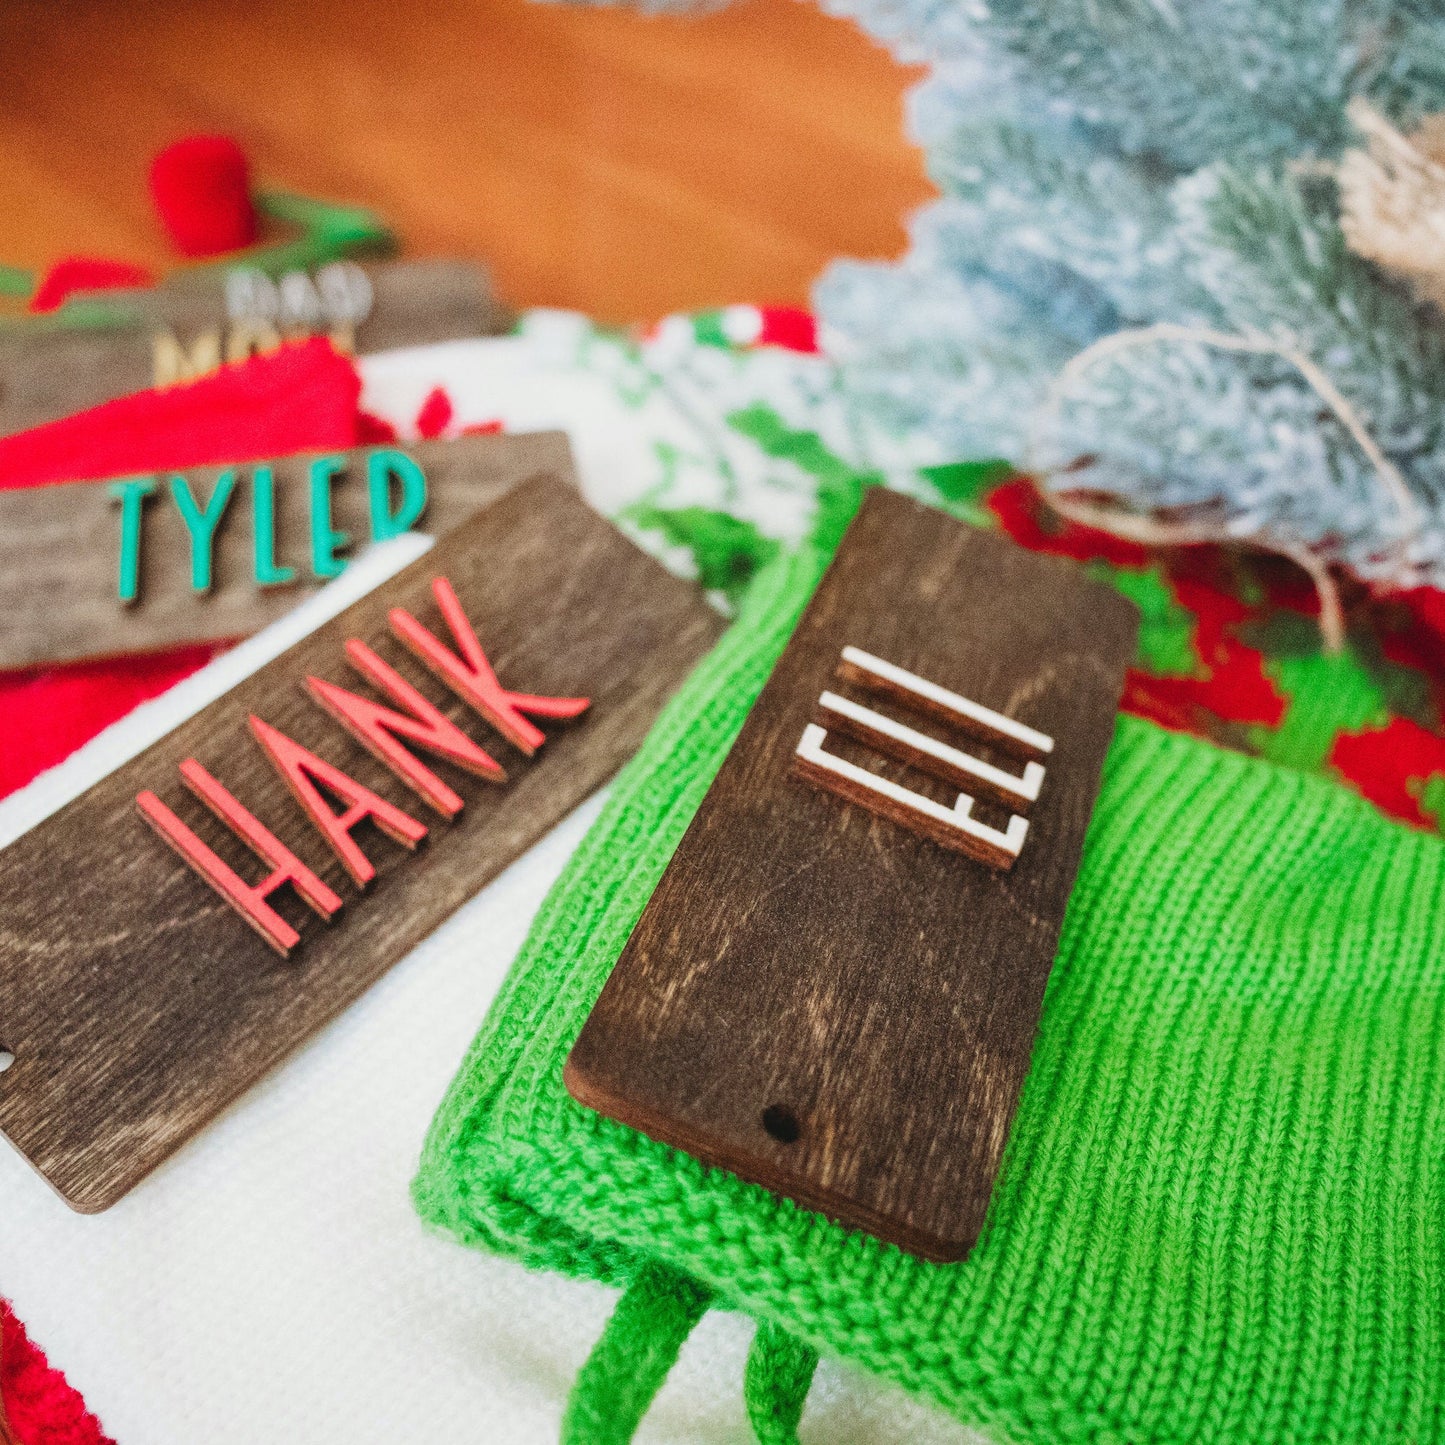 Personalized Wooden Stocking Tags, Modern Font - Dark Stained Laser Cut Wood with White, red, green lettering- Eli, Hank, Tyler - by LeeMo Designs in Bend, Oregon